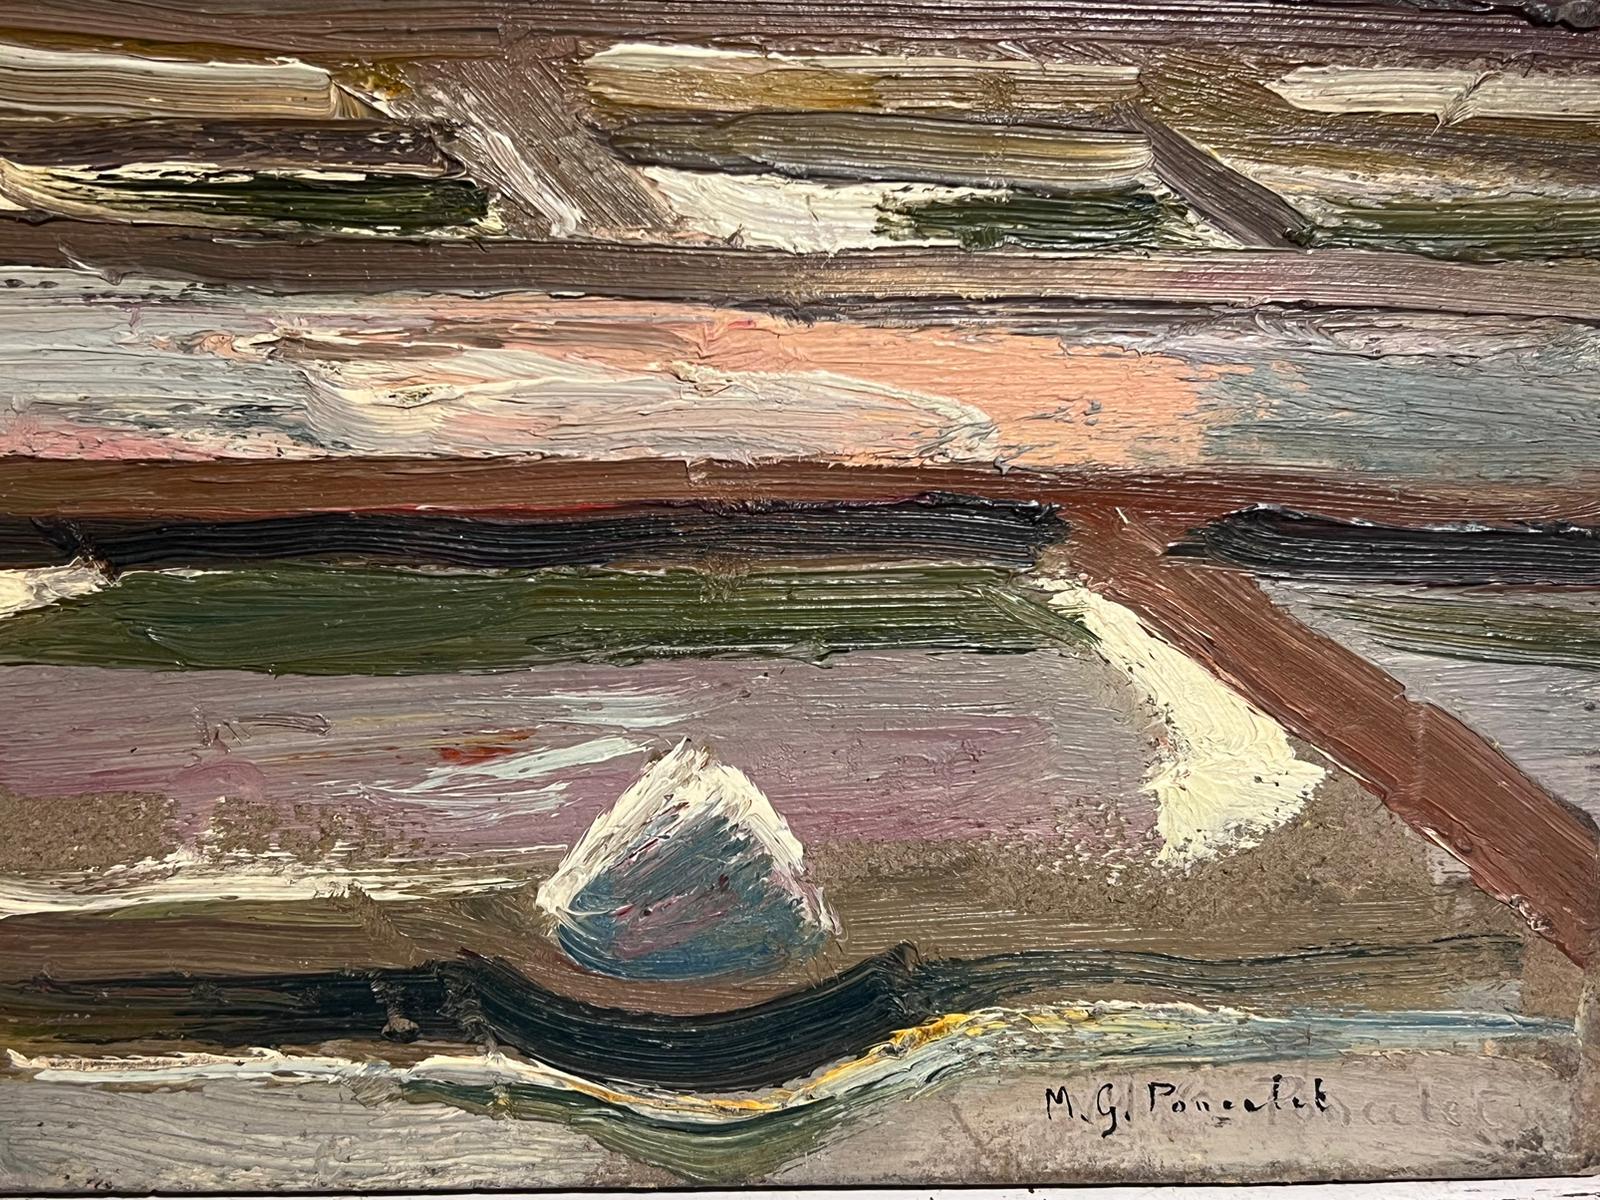 Landscape
by Maurice Georges Poncelet (French, 1897-1978)
oil painting on board, signed verso
9.5 x 13 inches
condition: overall good and sound though a little shabby from previous storage with the corners and edges being worn. 
provenance: all the